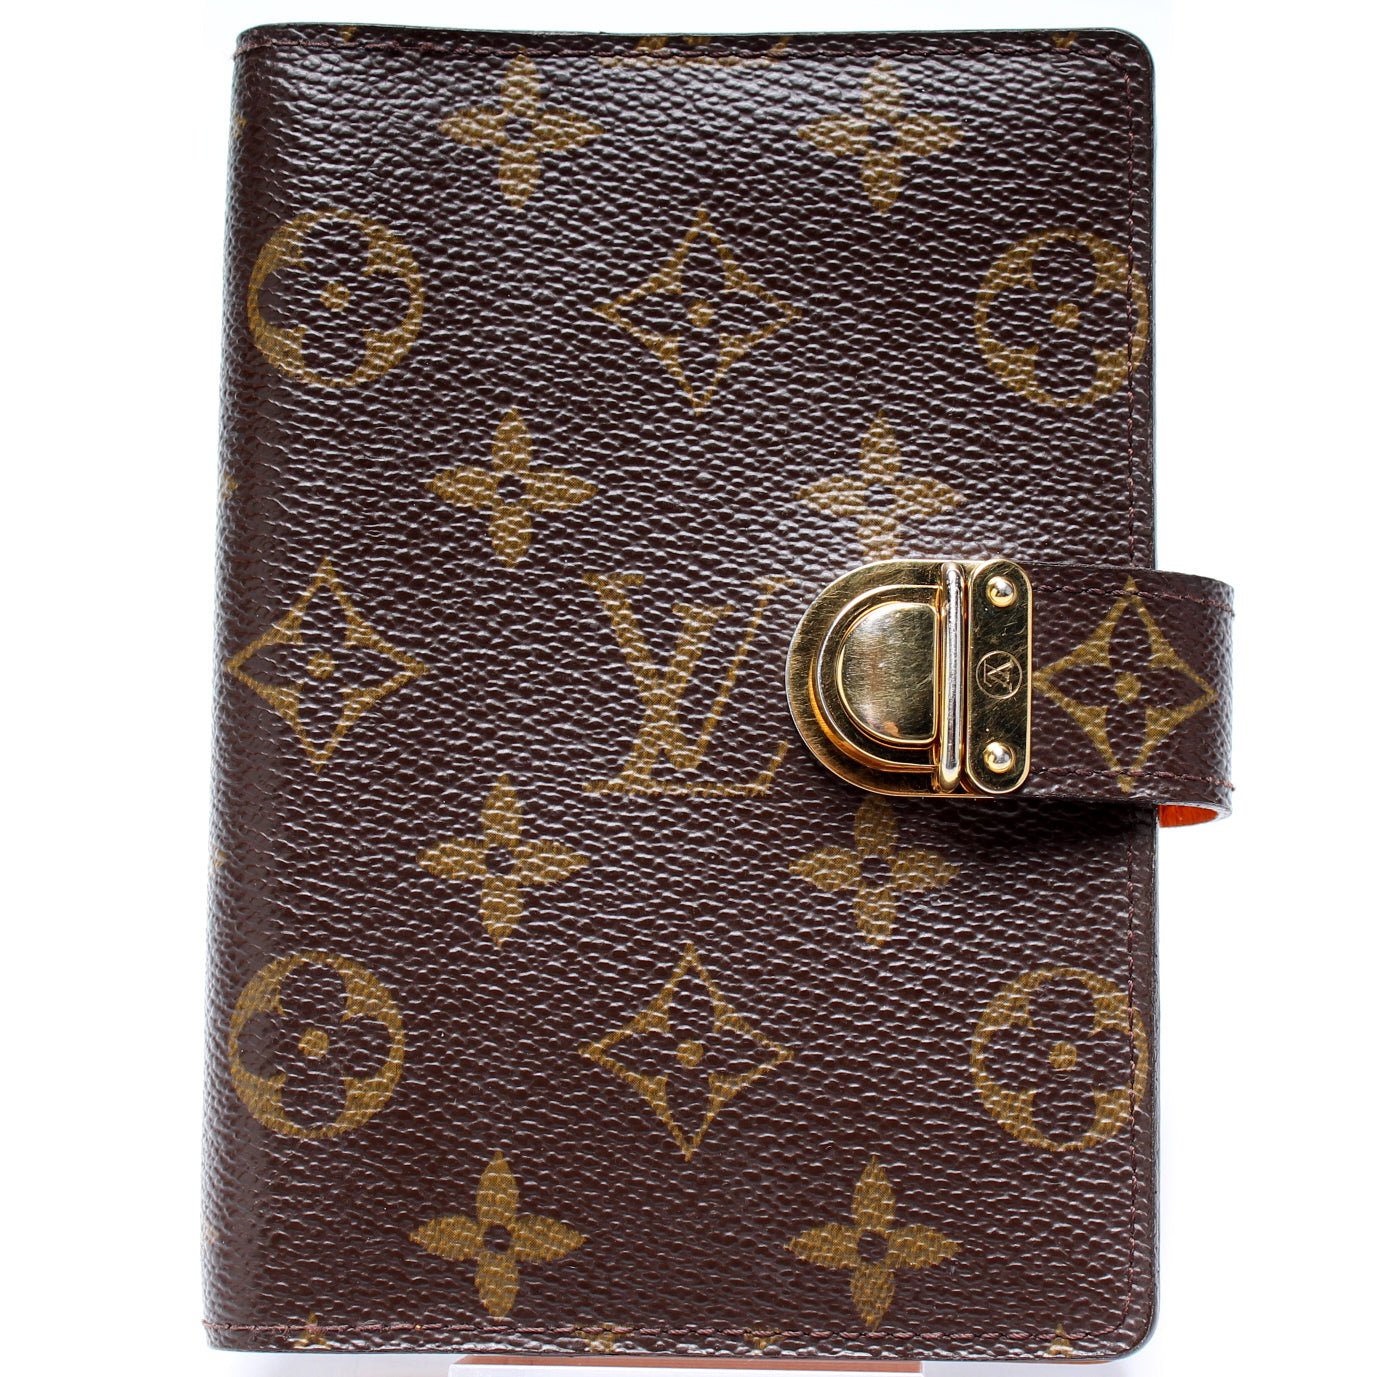 Louis Vuitton - Authenticated Koala Wallet - Leather Brown for Women, Good Condition